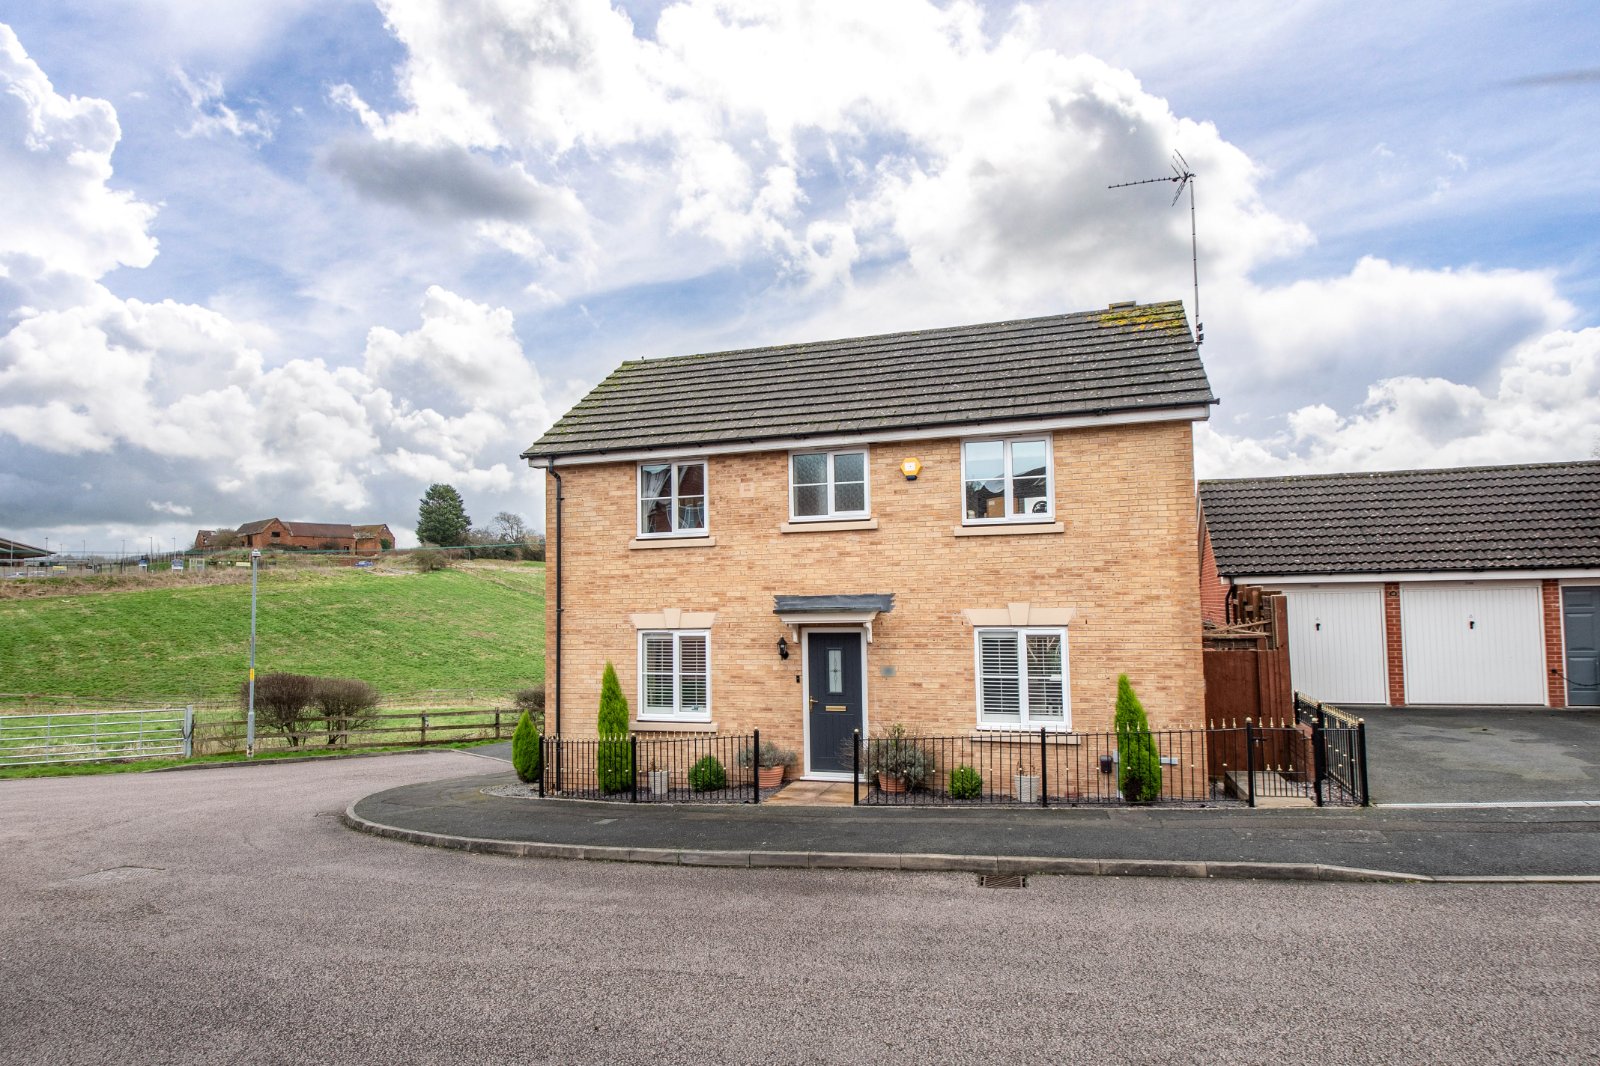 4 bed house for sale in Robins Lane, Redditch - Property Image 1